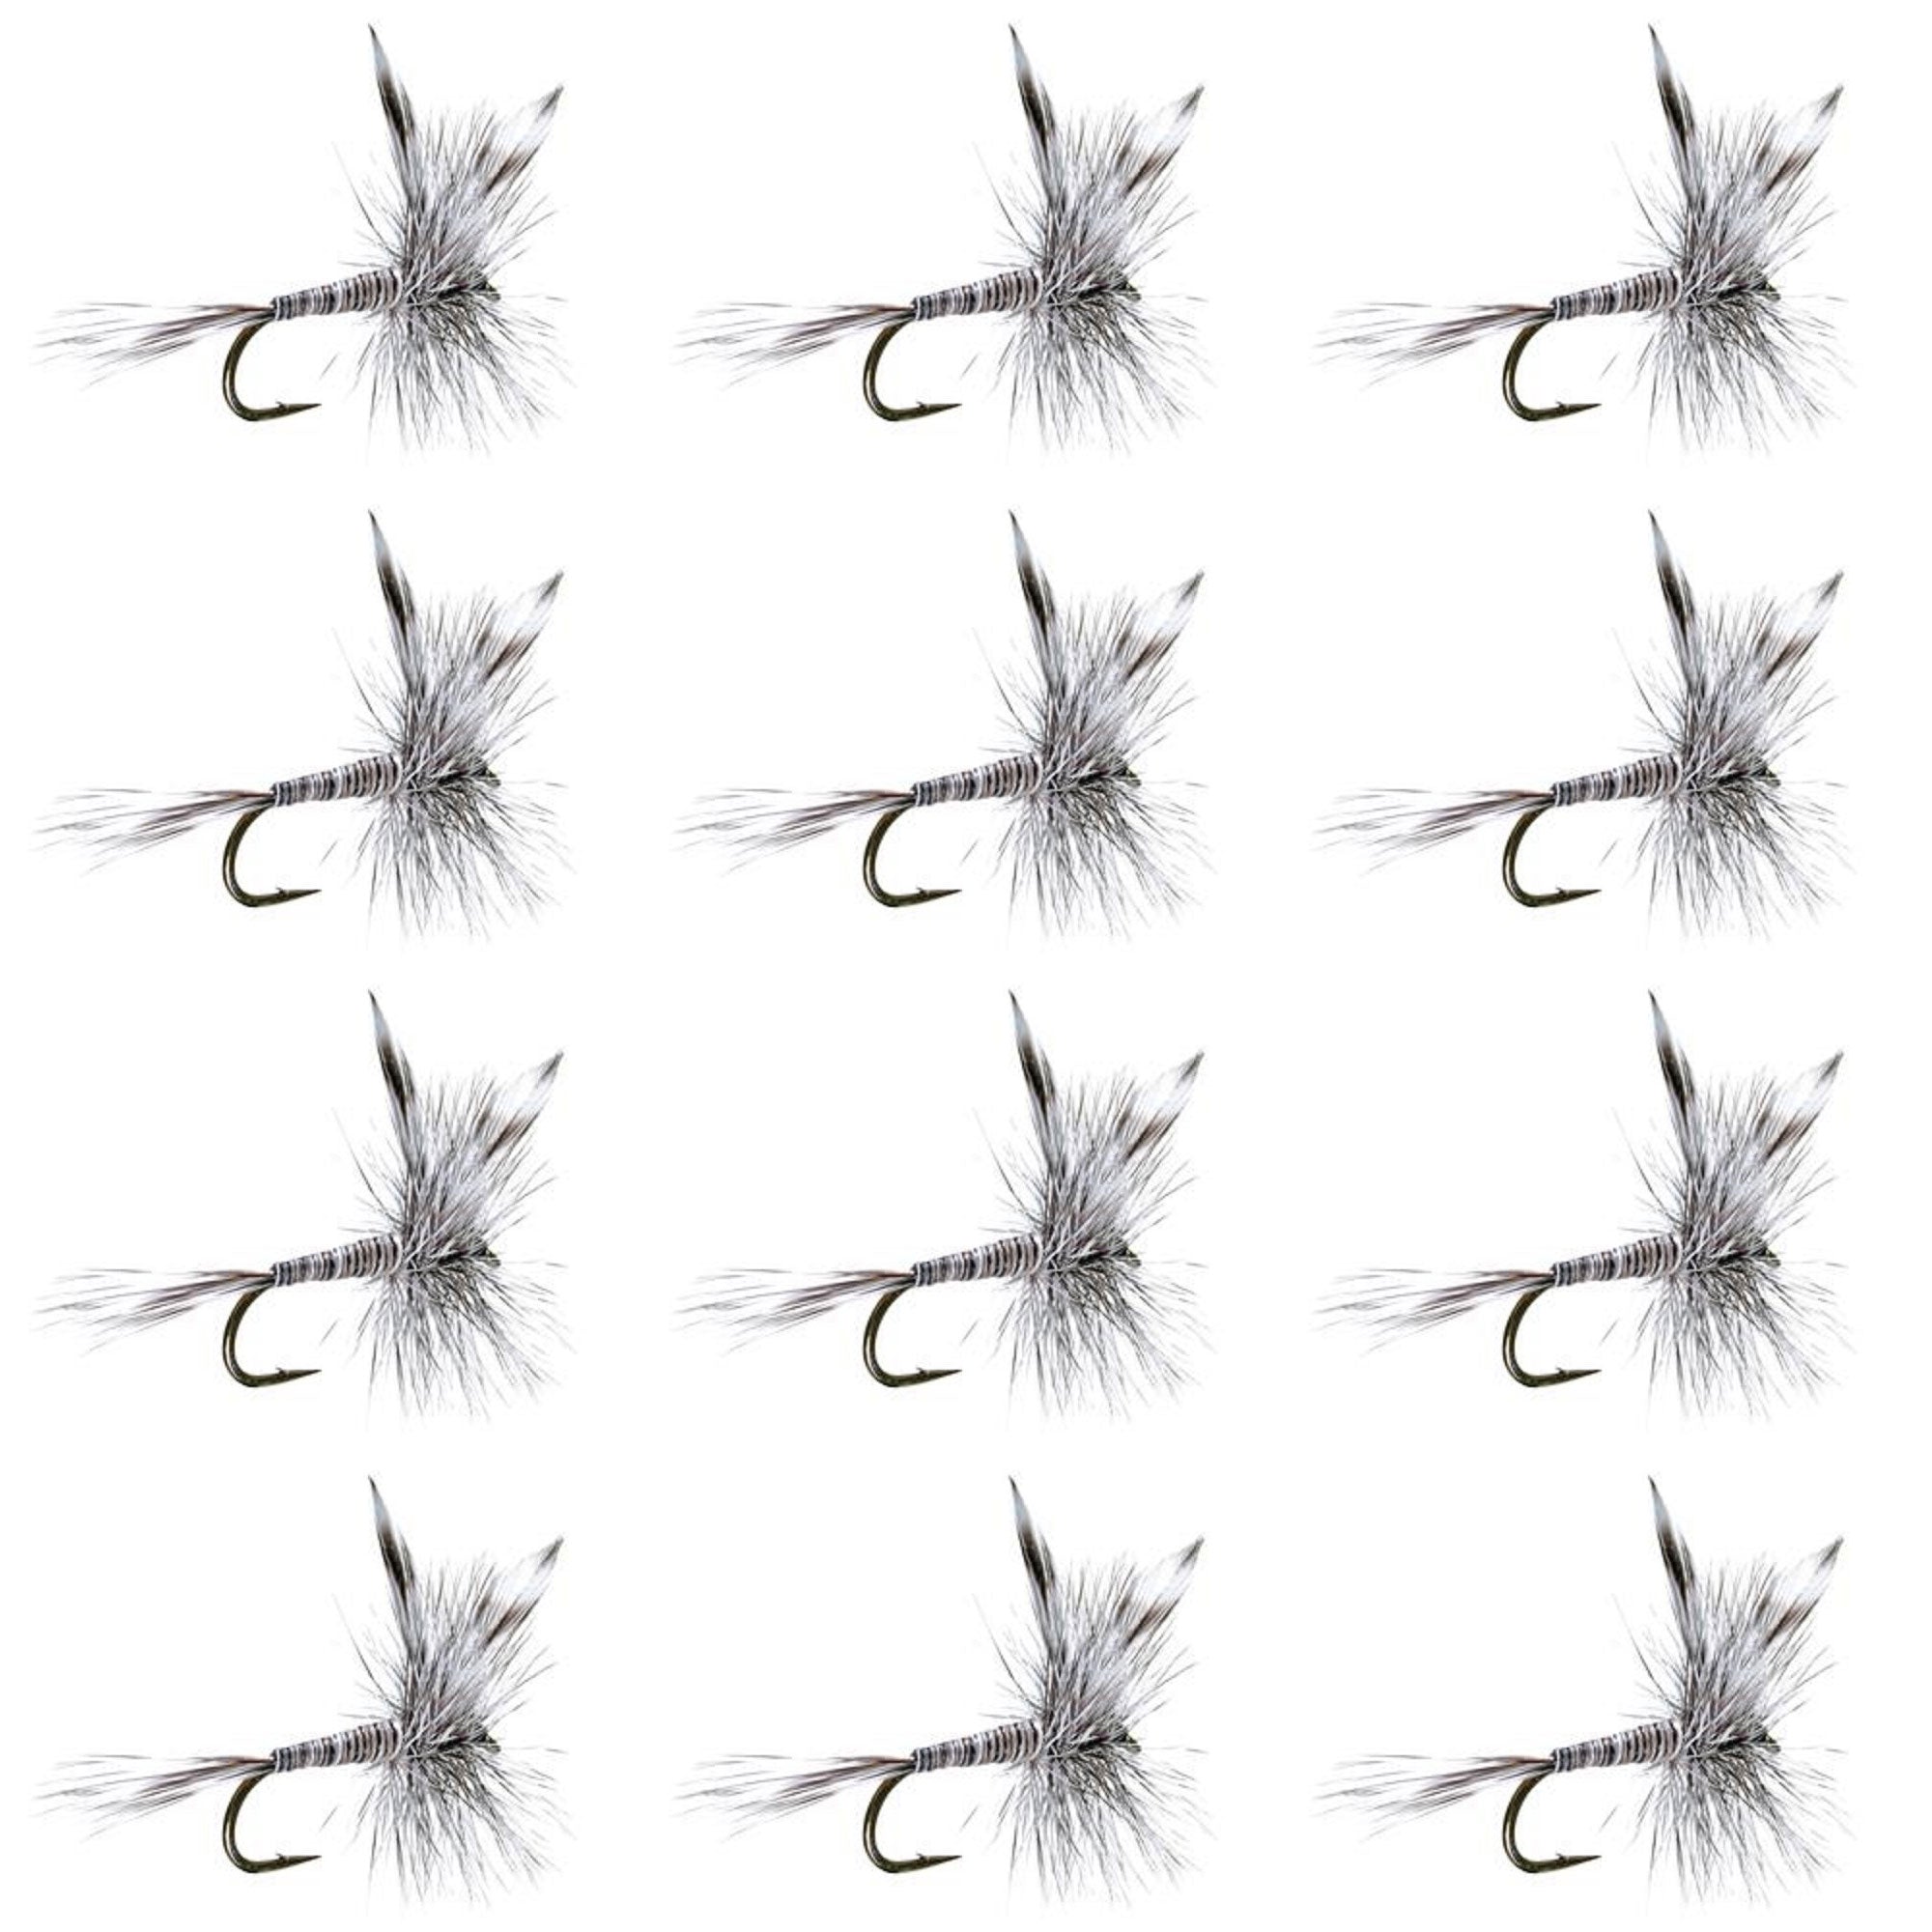 Mosquito Classic Trout Dry Fly Fishing Flies - 1 Dozen Size 10